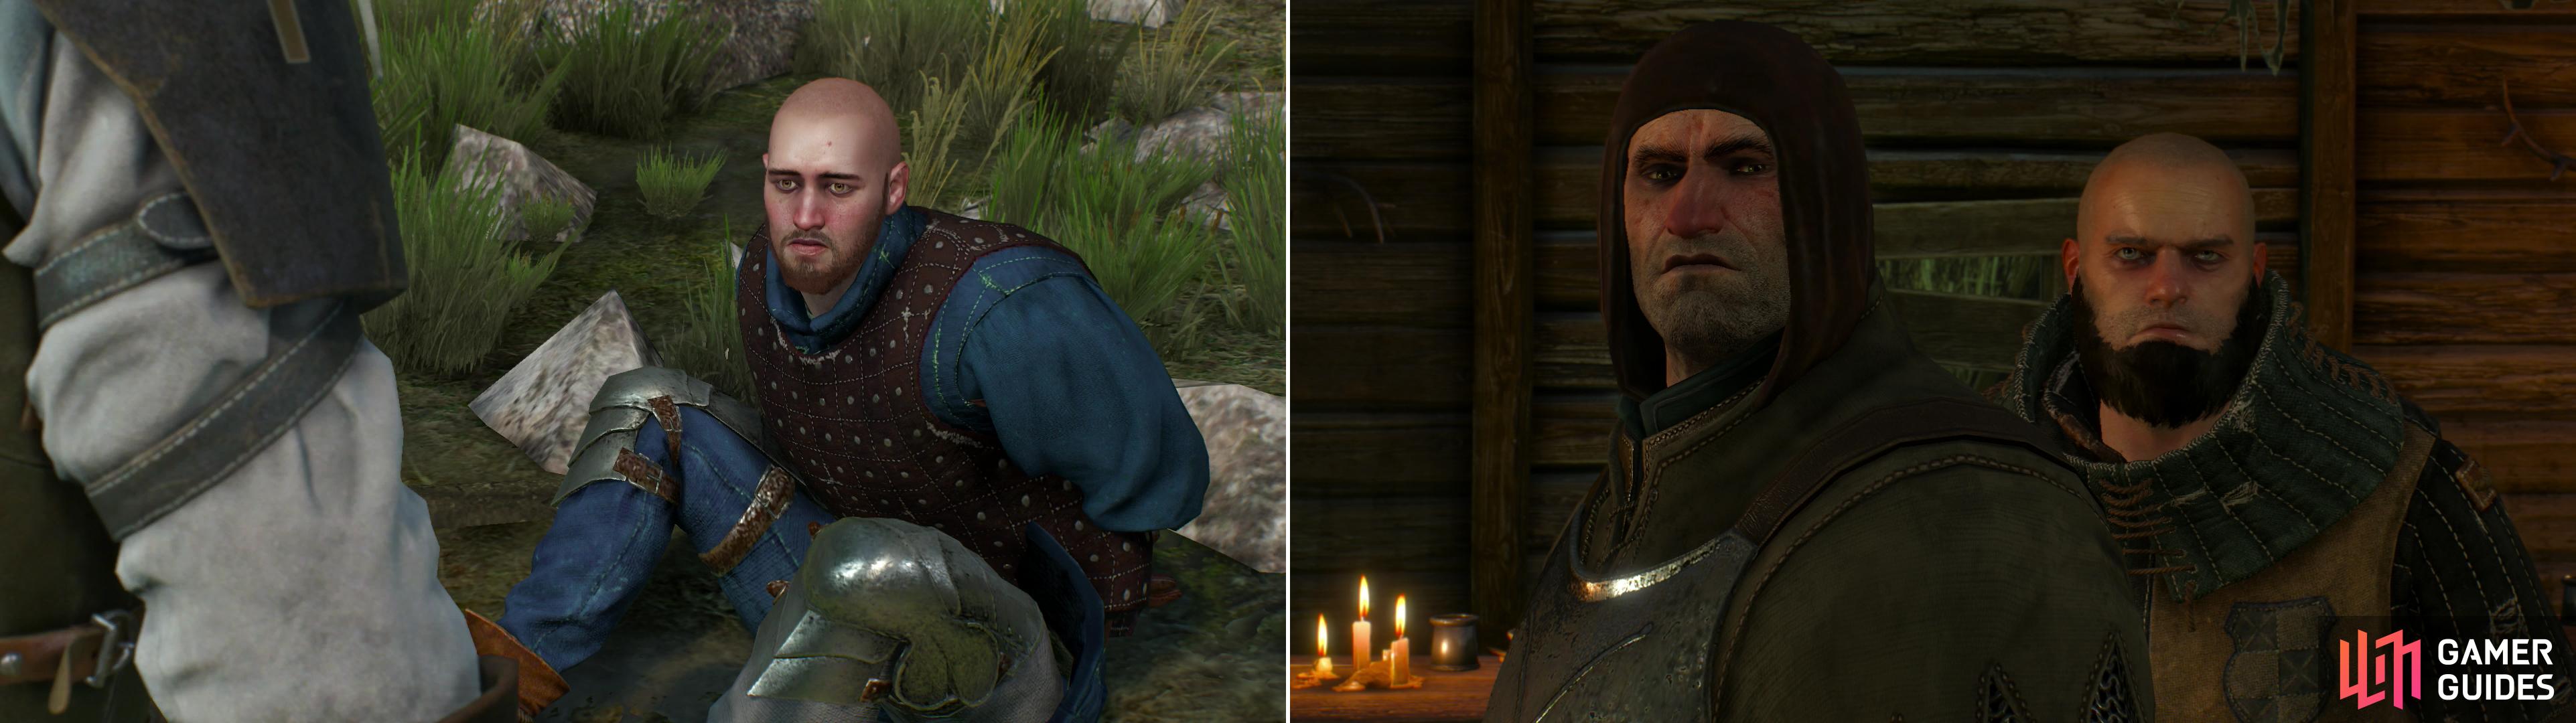 John Verdun has been tied up and left for the Drowners (left). Friendly faces are scarce at the Inn at the Crossroads (right).